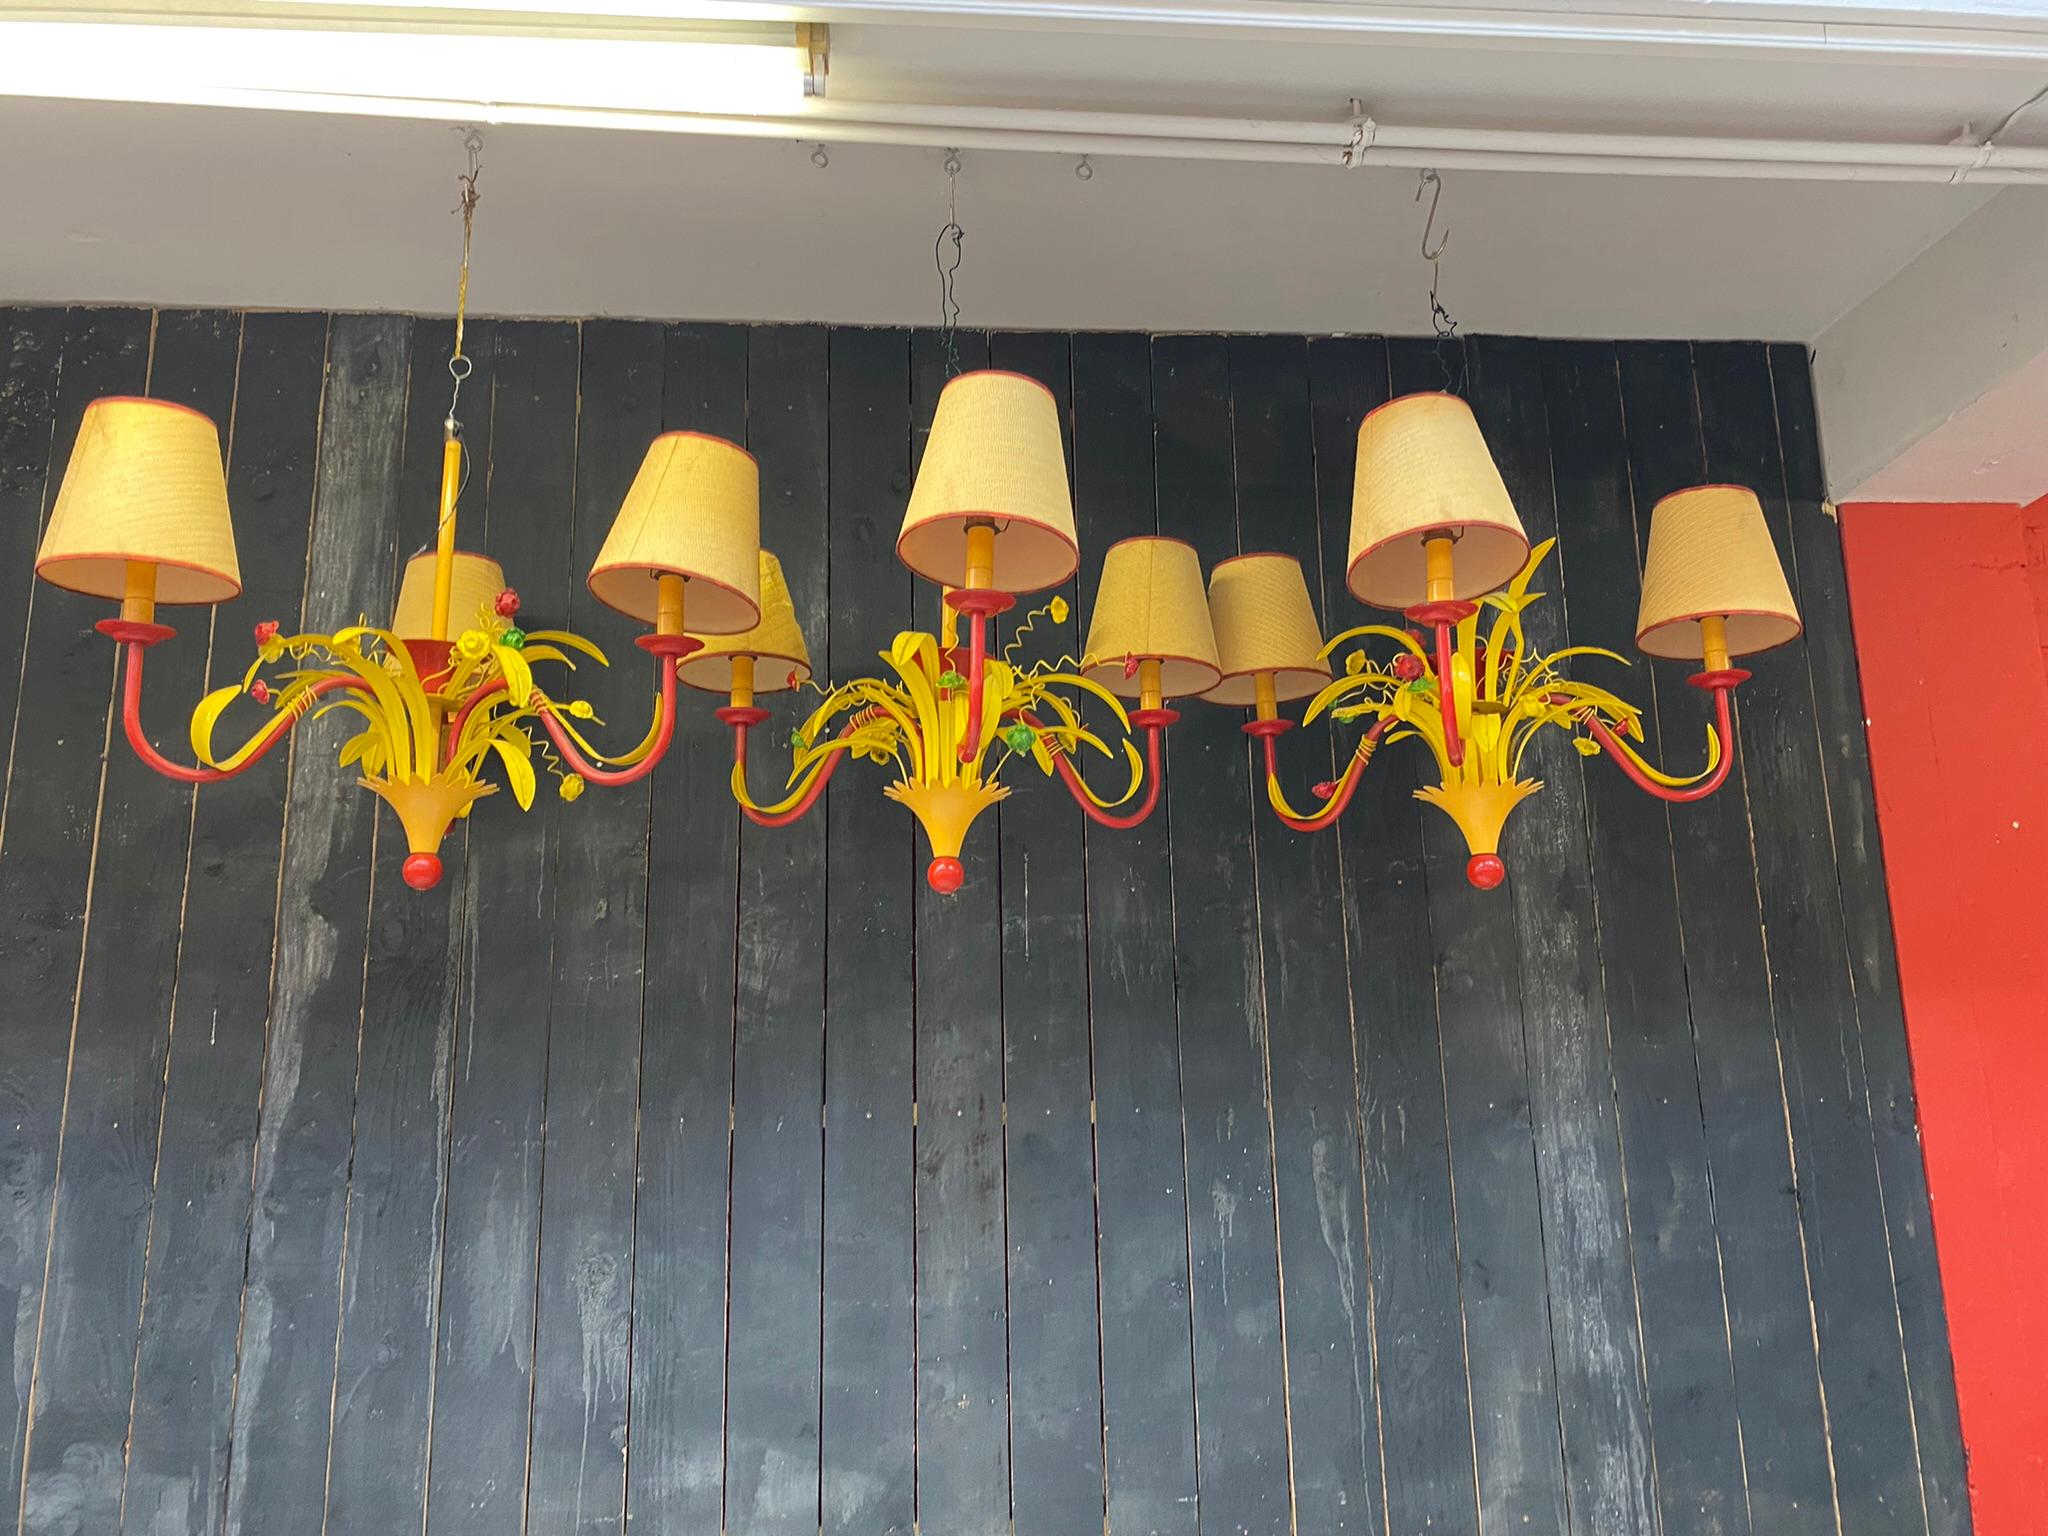 3 circus chandeliers in lacquered metal, circa 1970
Origin: West of France circus
Small traces of corrosion on the top of the leaves, invisible when the chandelier is hung
The price is for one item
Circus barriers are offered in another ad.